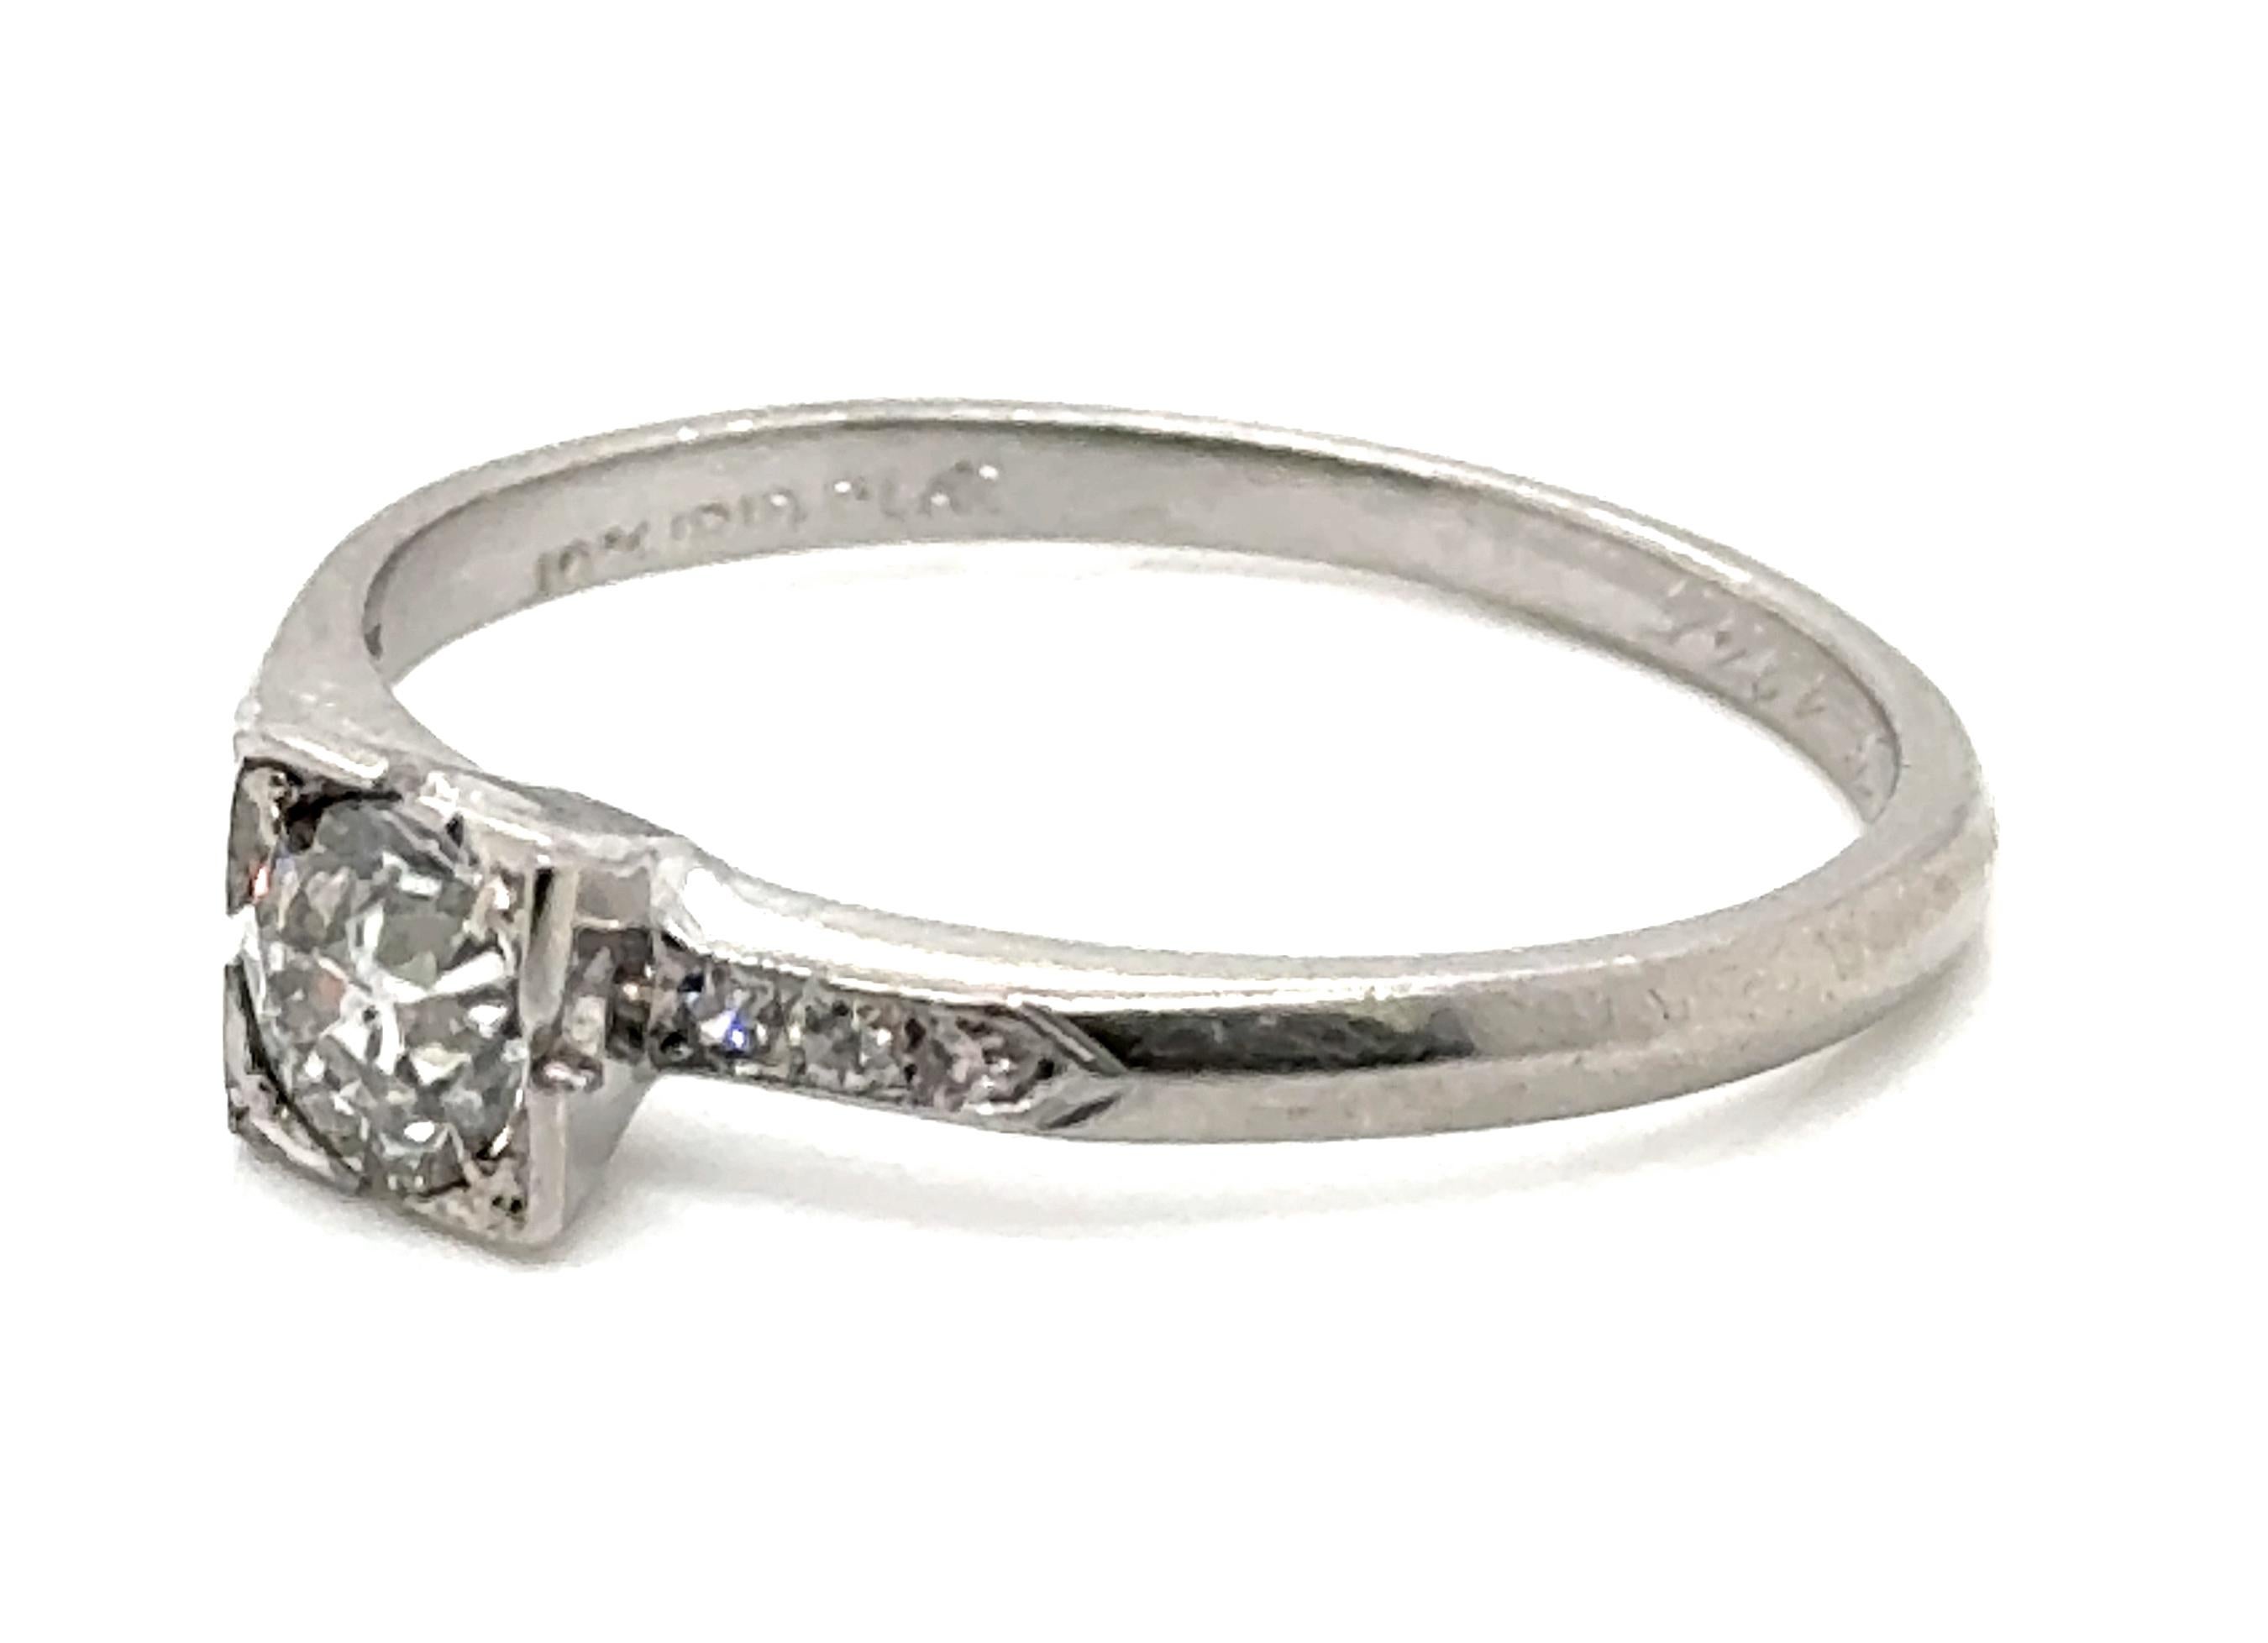 Genuine Original Antique from 1935 Diamond Solitaire Engagement Ring .38ct Old European Cut Platinum


Featuring a Genuine .32ct Natural Mined Old European Cut Diamond Center

Genuine Antique Single Cut Diamonds Flank the Main Setting

Engraved with